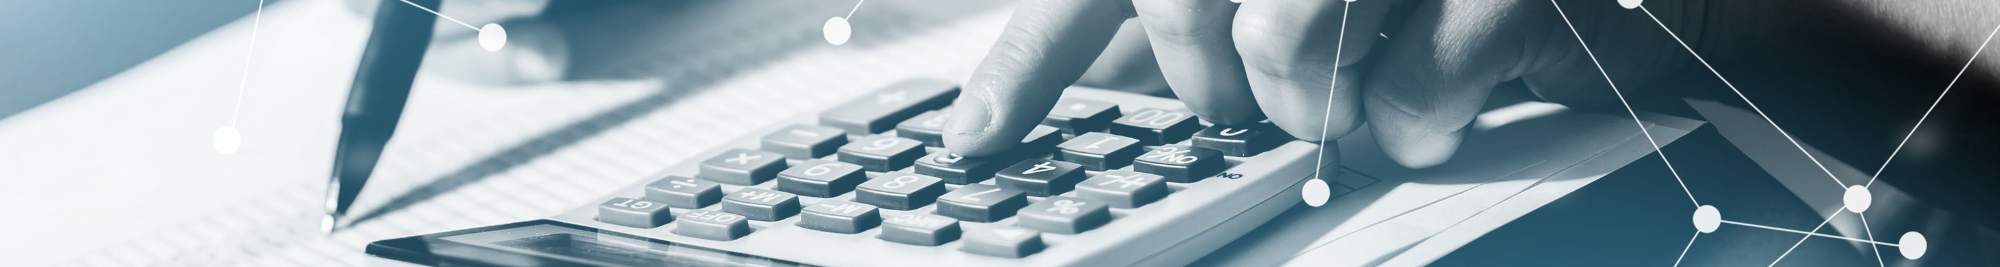 Close up image of a person holding a pen and using a calculator